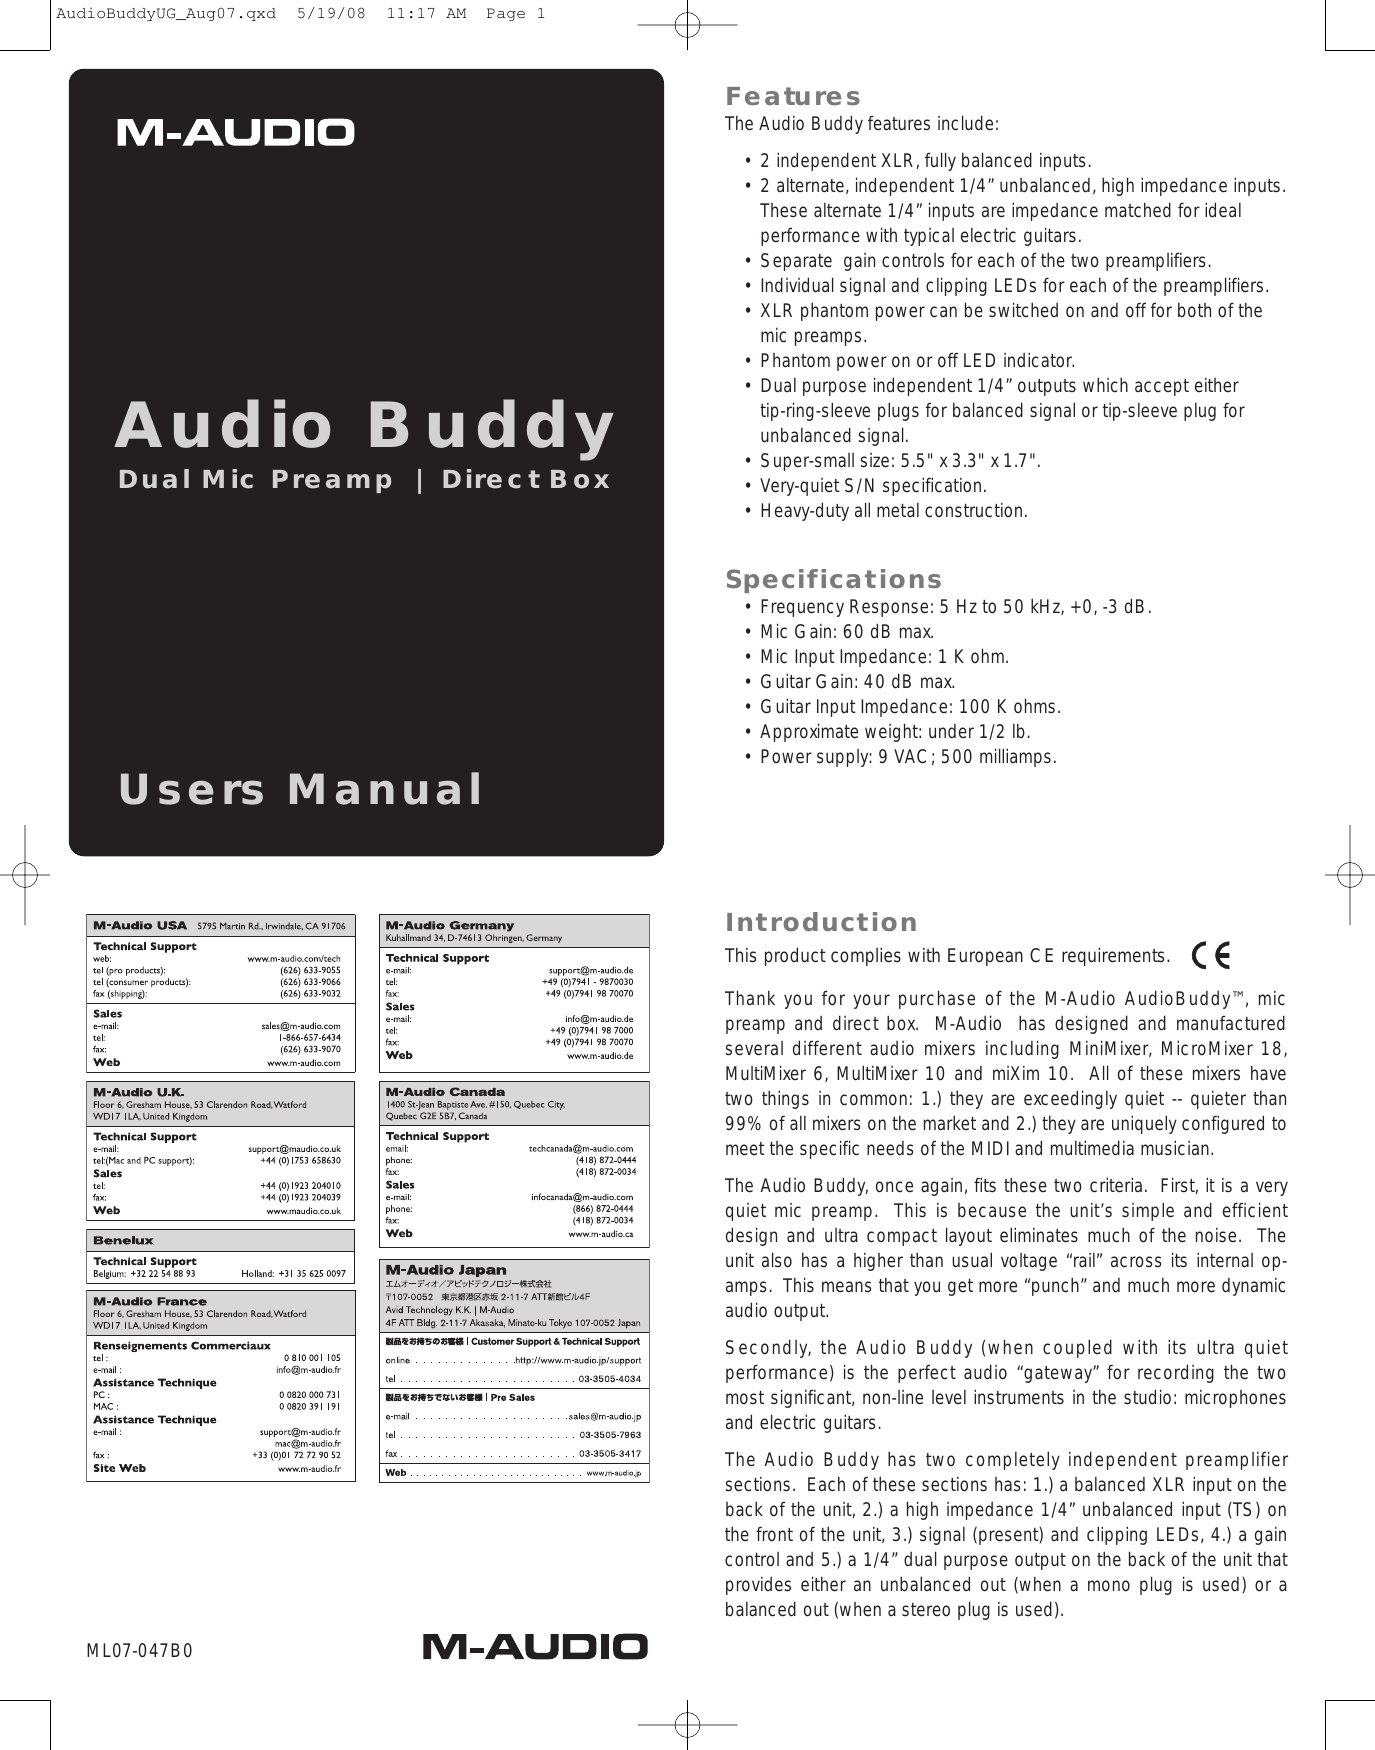 Page 6 of 8 - M-Audio M-Audio-Audio-Buddy-Dual-Mic-Preamp-Users-Manual- Audio Buddy User Guide  M-audio-audio-buddy-dual-mic-preamp-users-manual